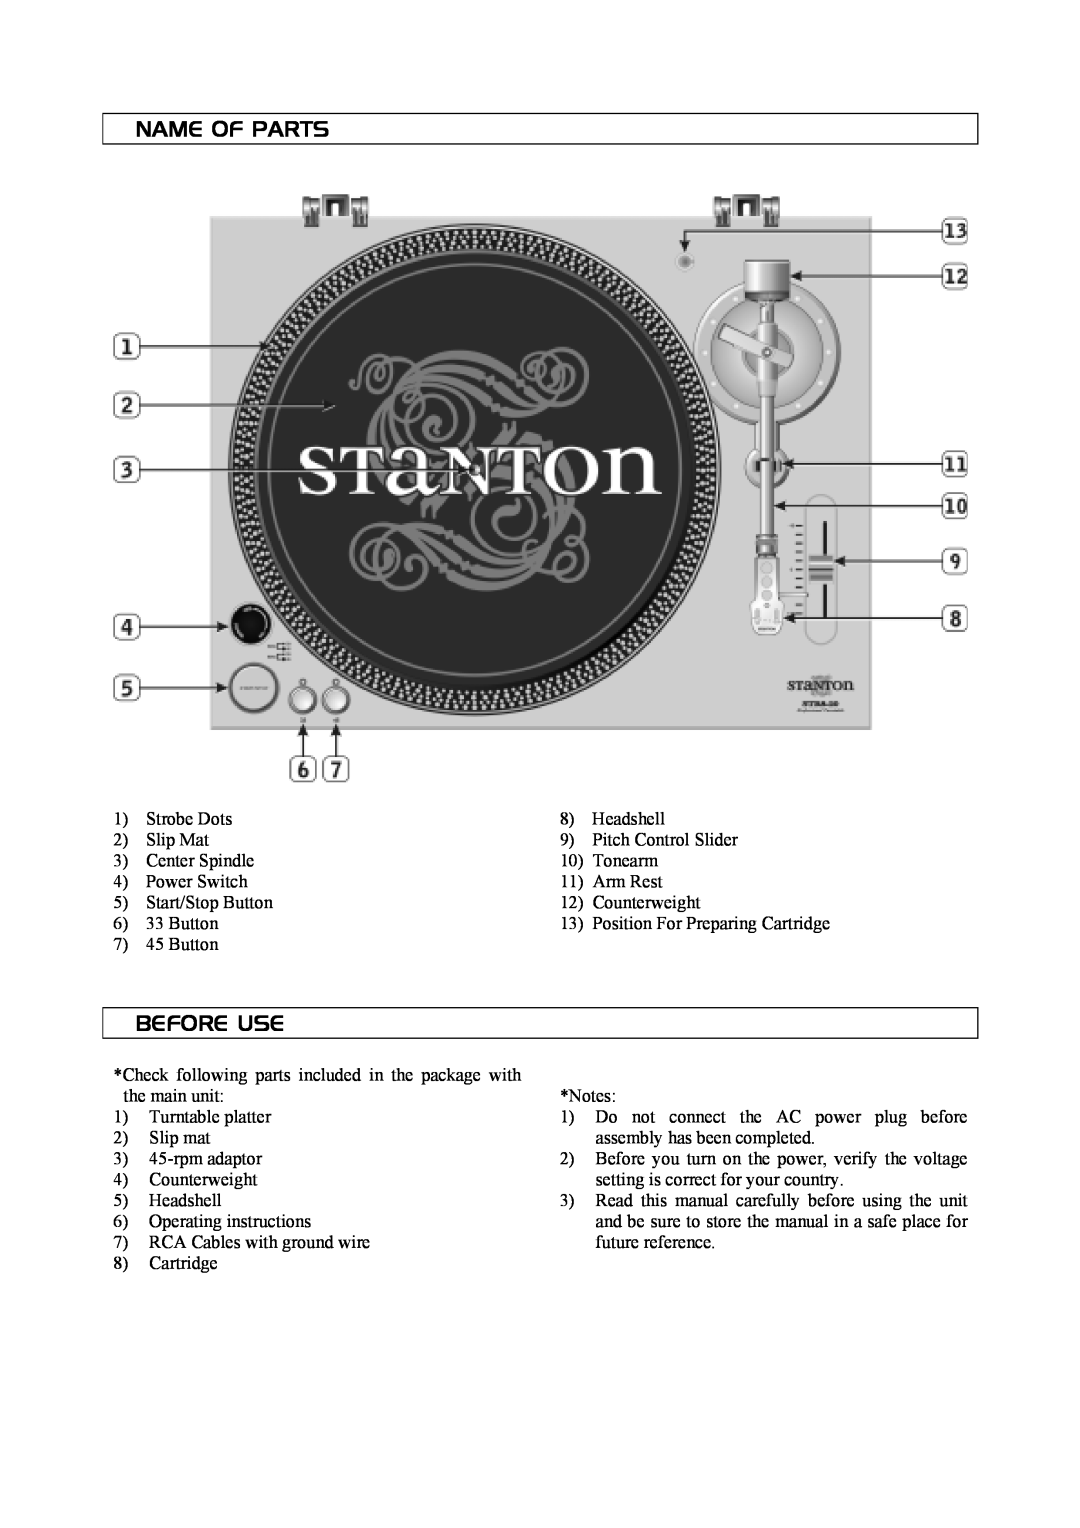 Stanton STR8-20 manual Name Of Parts, Before Use 